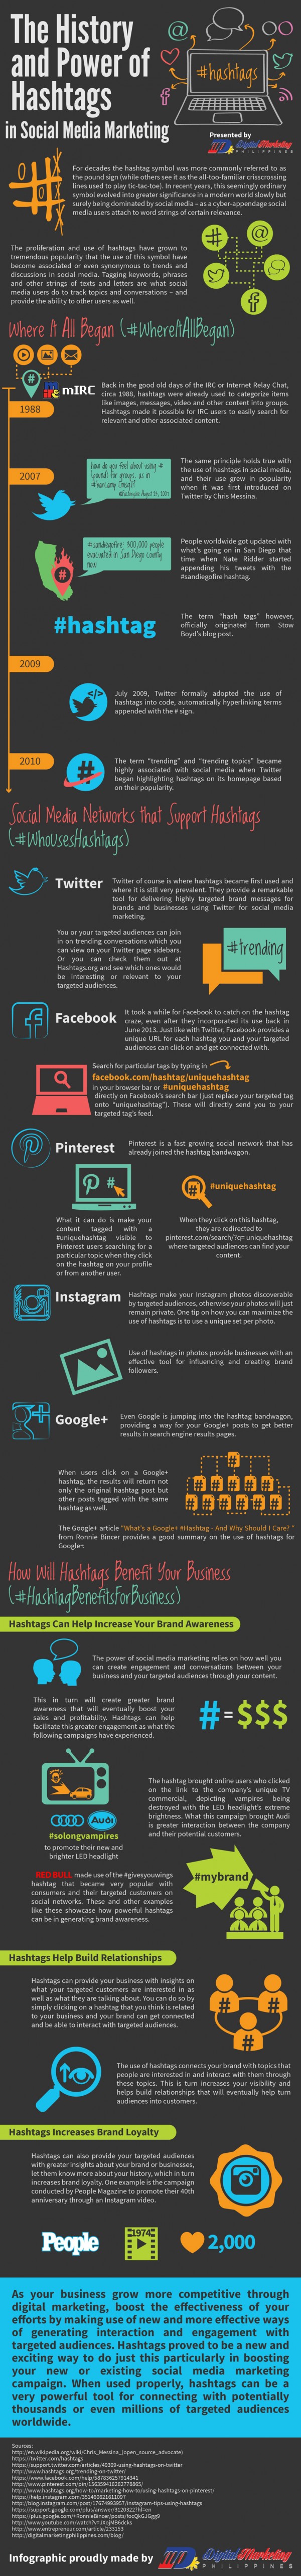 The-Power-of-Hashtags-in-Social-Media-Marketing-Infographic